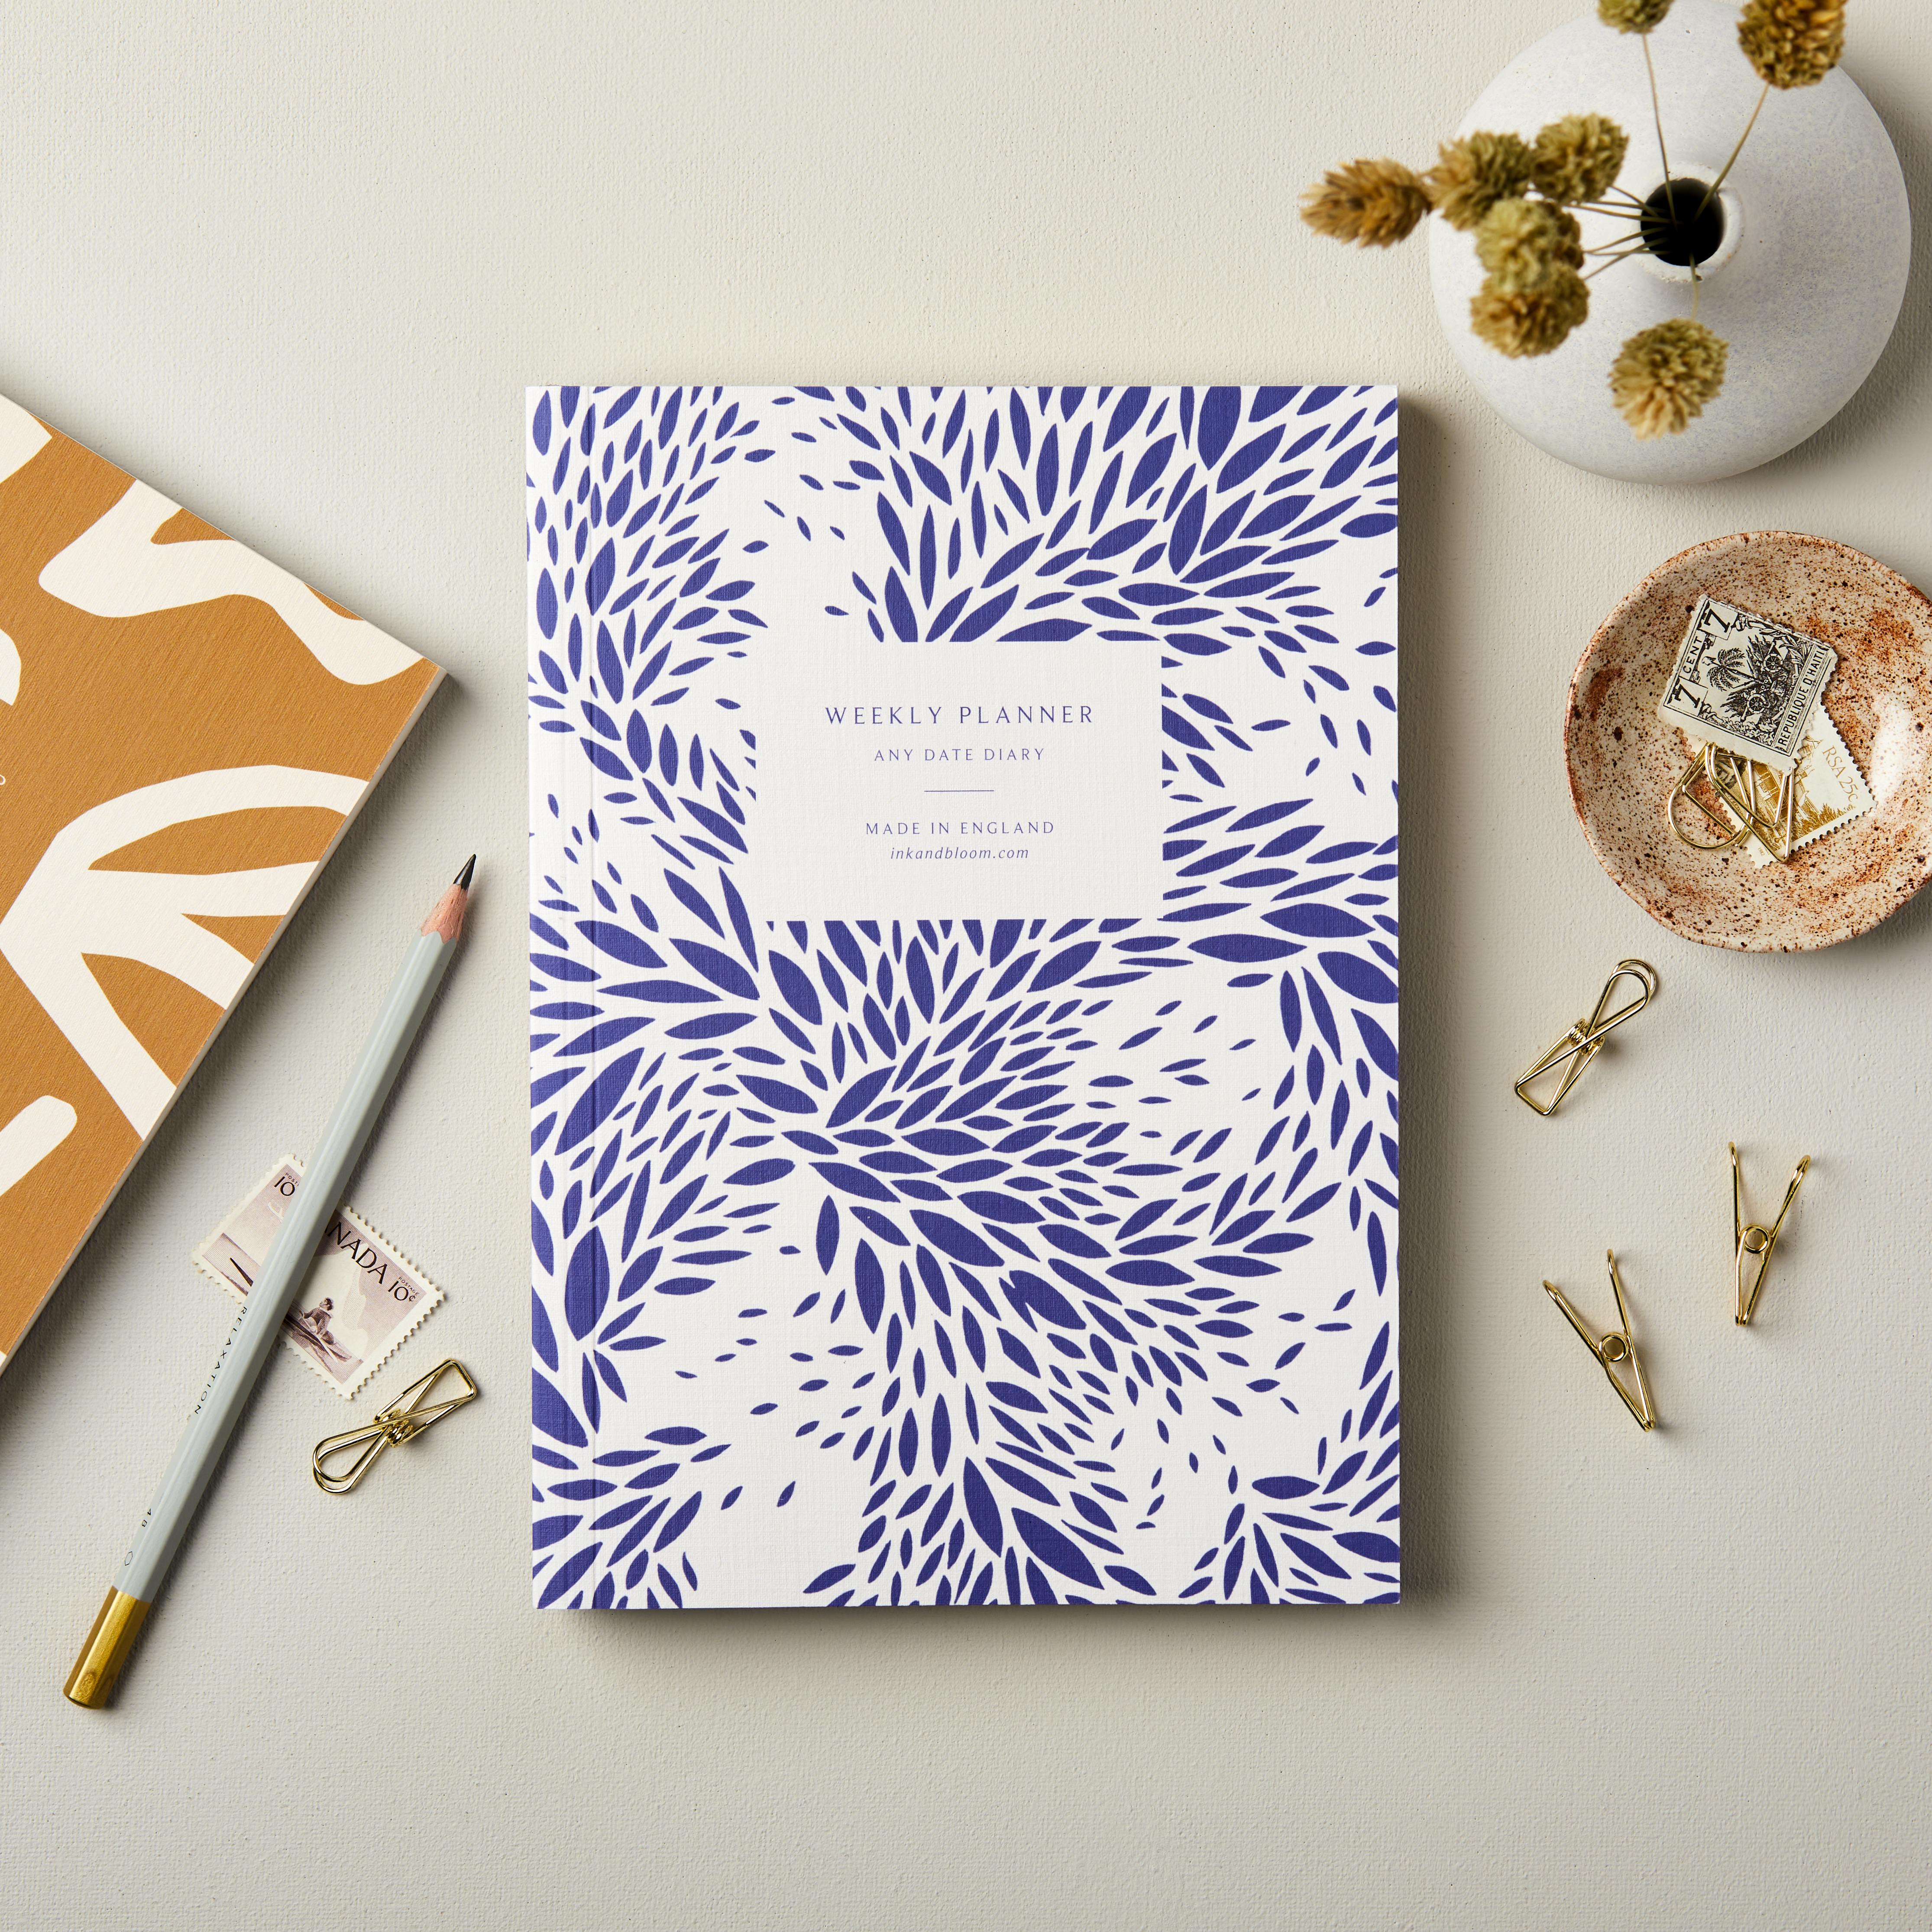 Weekly Planner, A5, Undated in Blue Floral